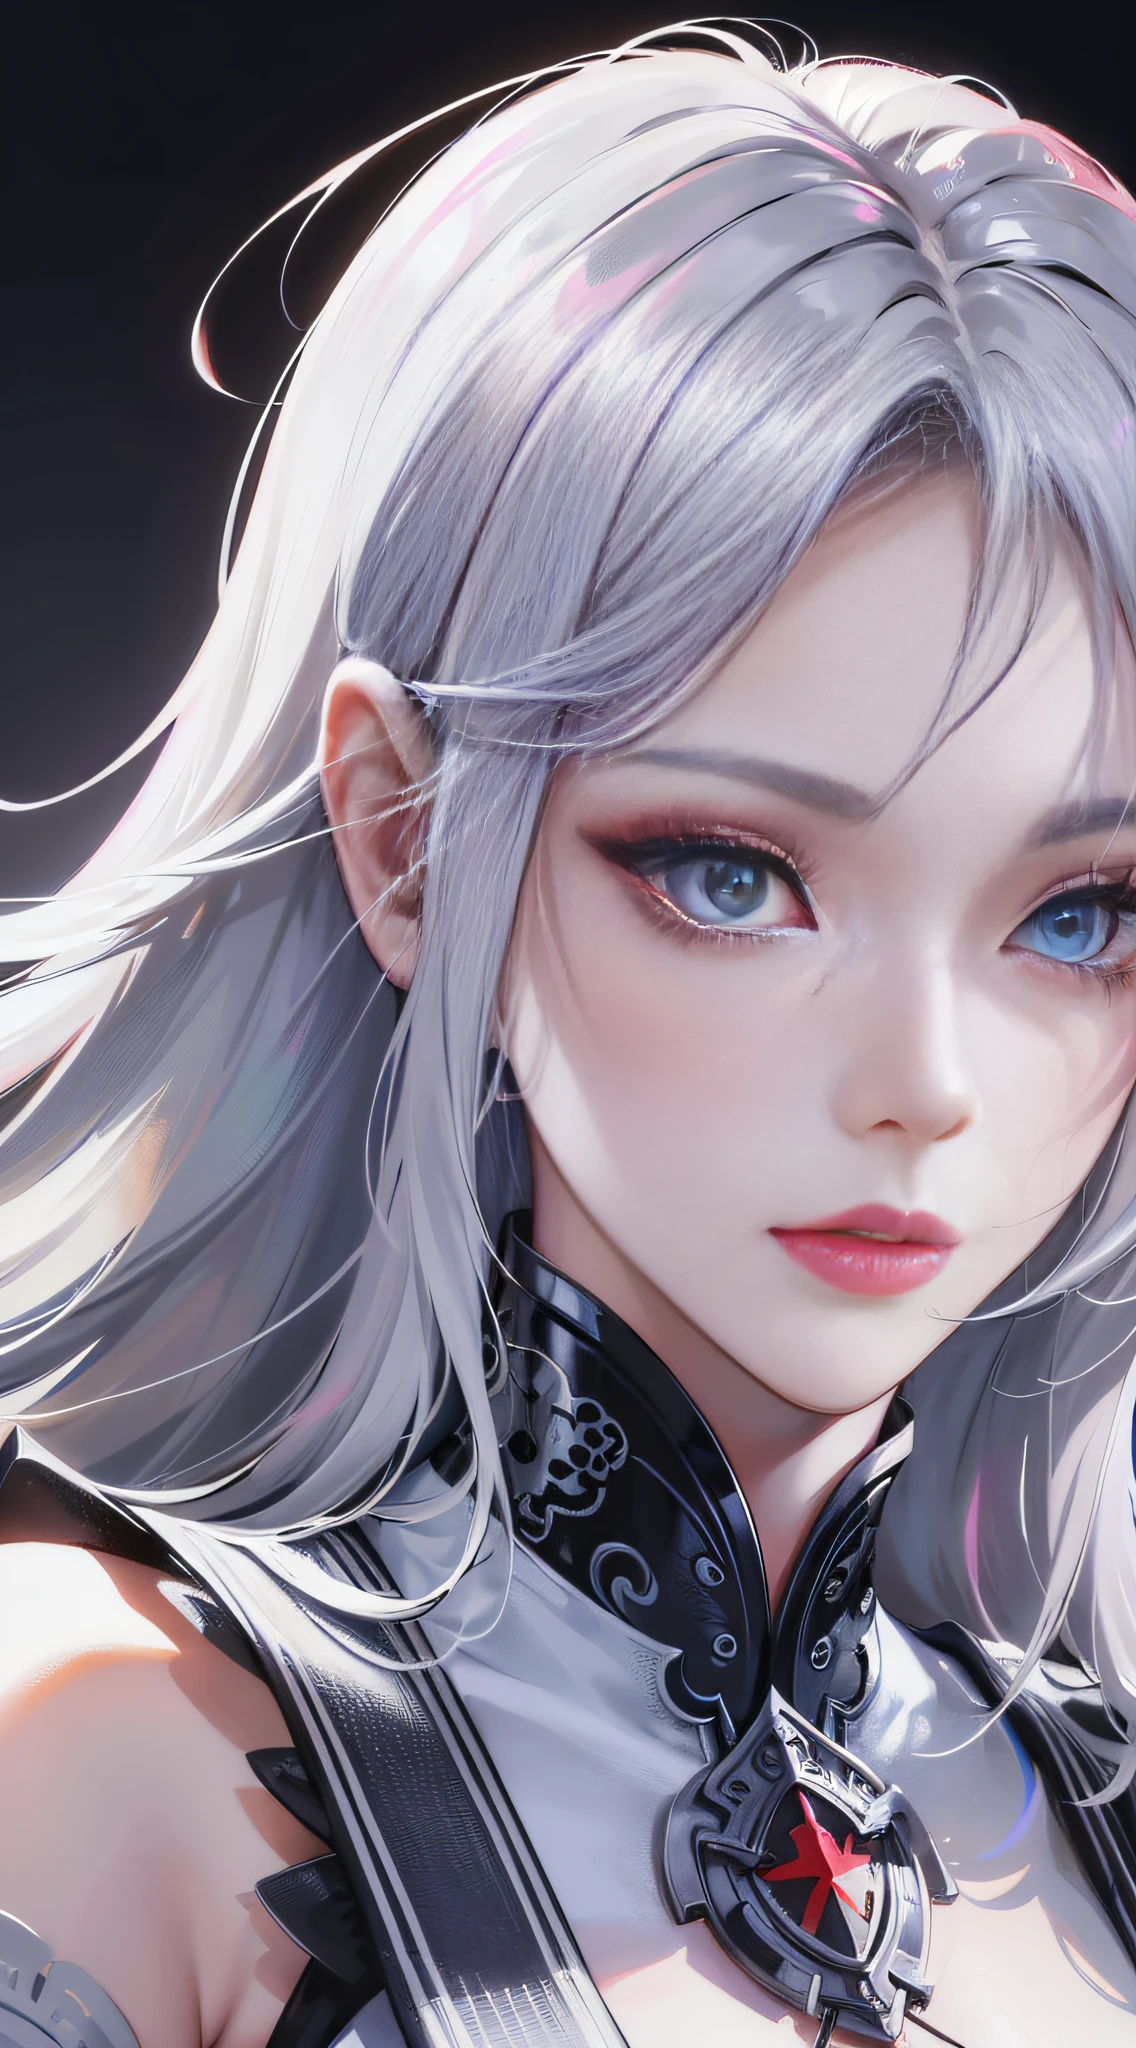 Masterpiece, Excellent, Chinese Style, Ancient China, 1 Woman, Mature Woman, Super Delicate Face, Delicate Eyes, Focused Eyes, Silver White Long Haired Woman, Gray Blue Eyes, Pale Pink Lips, Indifference, Serious, Bangs, Assassin, Sword, White Clothes, Blood, Violence, Death, Injury, Blood, Facial Bloodstain, Lots of Blood, Facial Details, Facial Details, Simple and Clean Background, Peaceful Space, Stunning Lighting, C4D, OC Rendering, Movie Edge Light, Fine Light, 32K, 4K Resolution